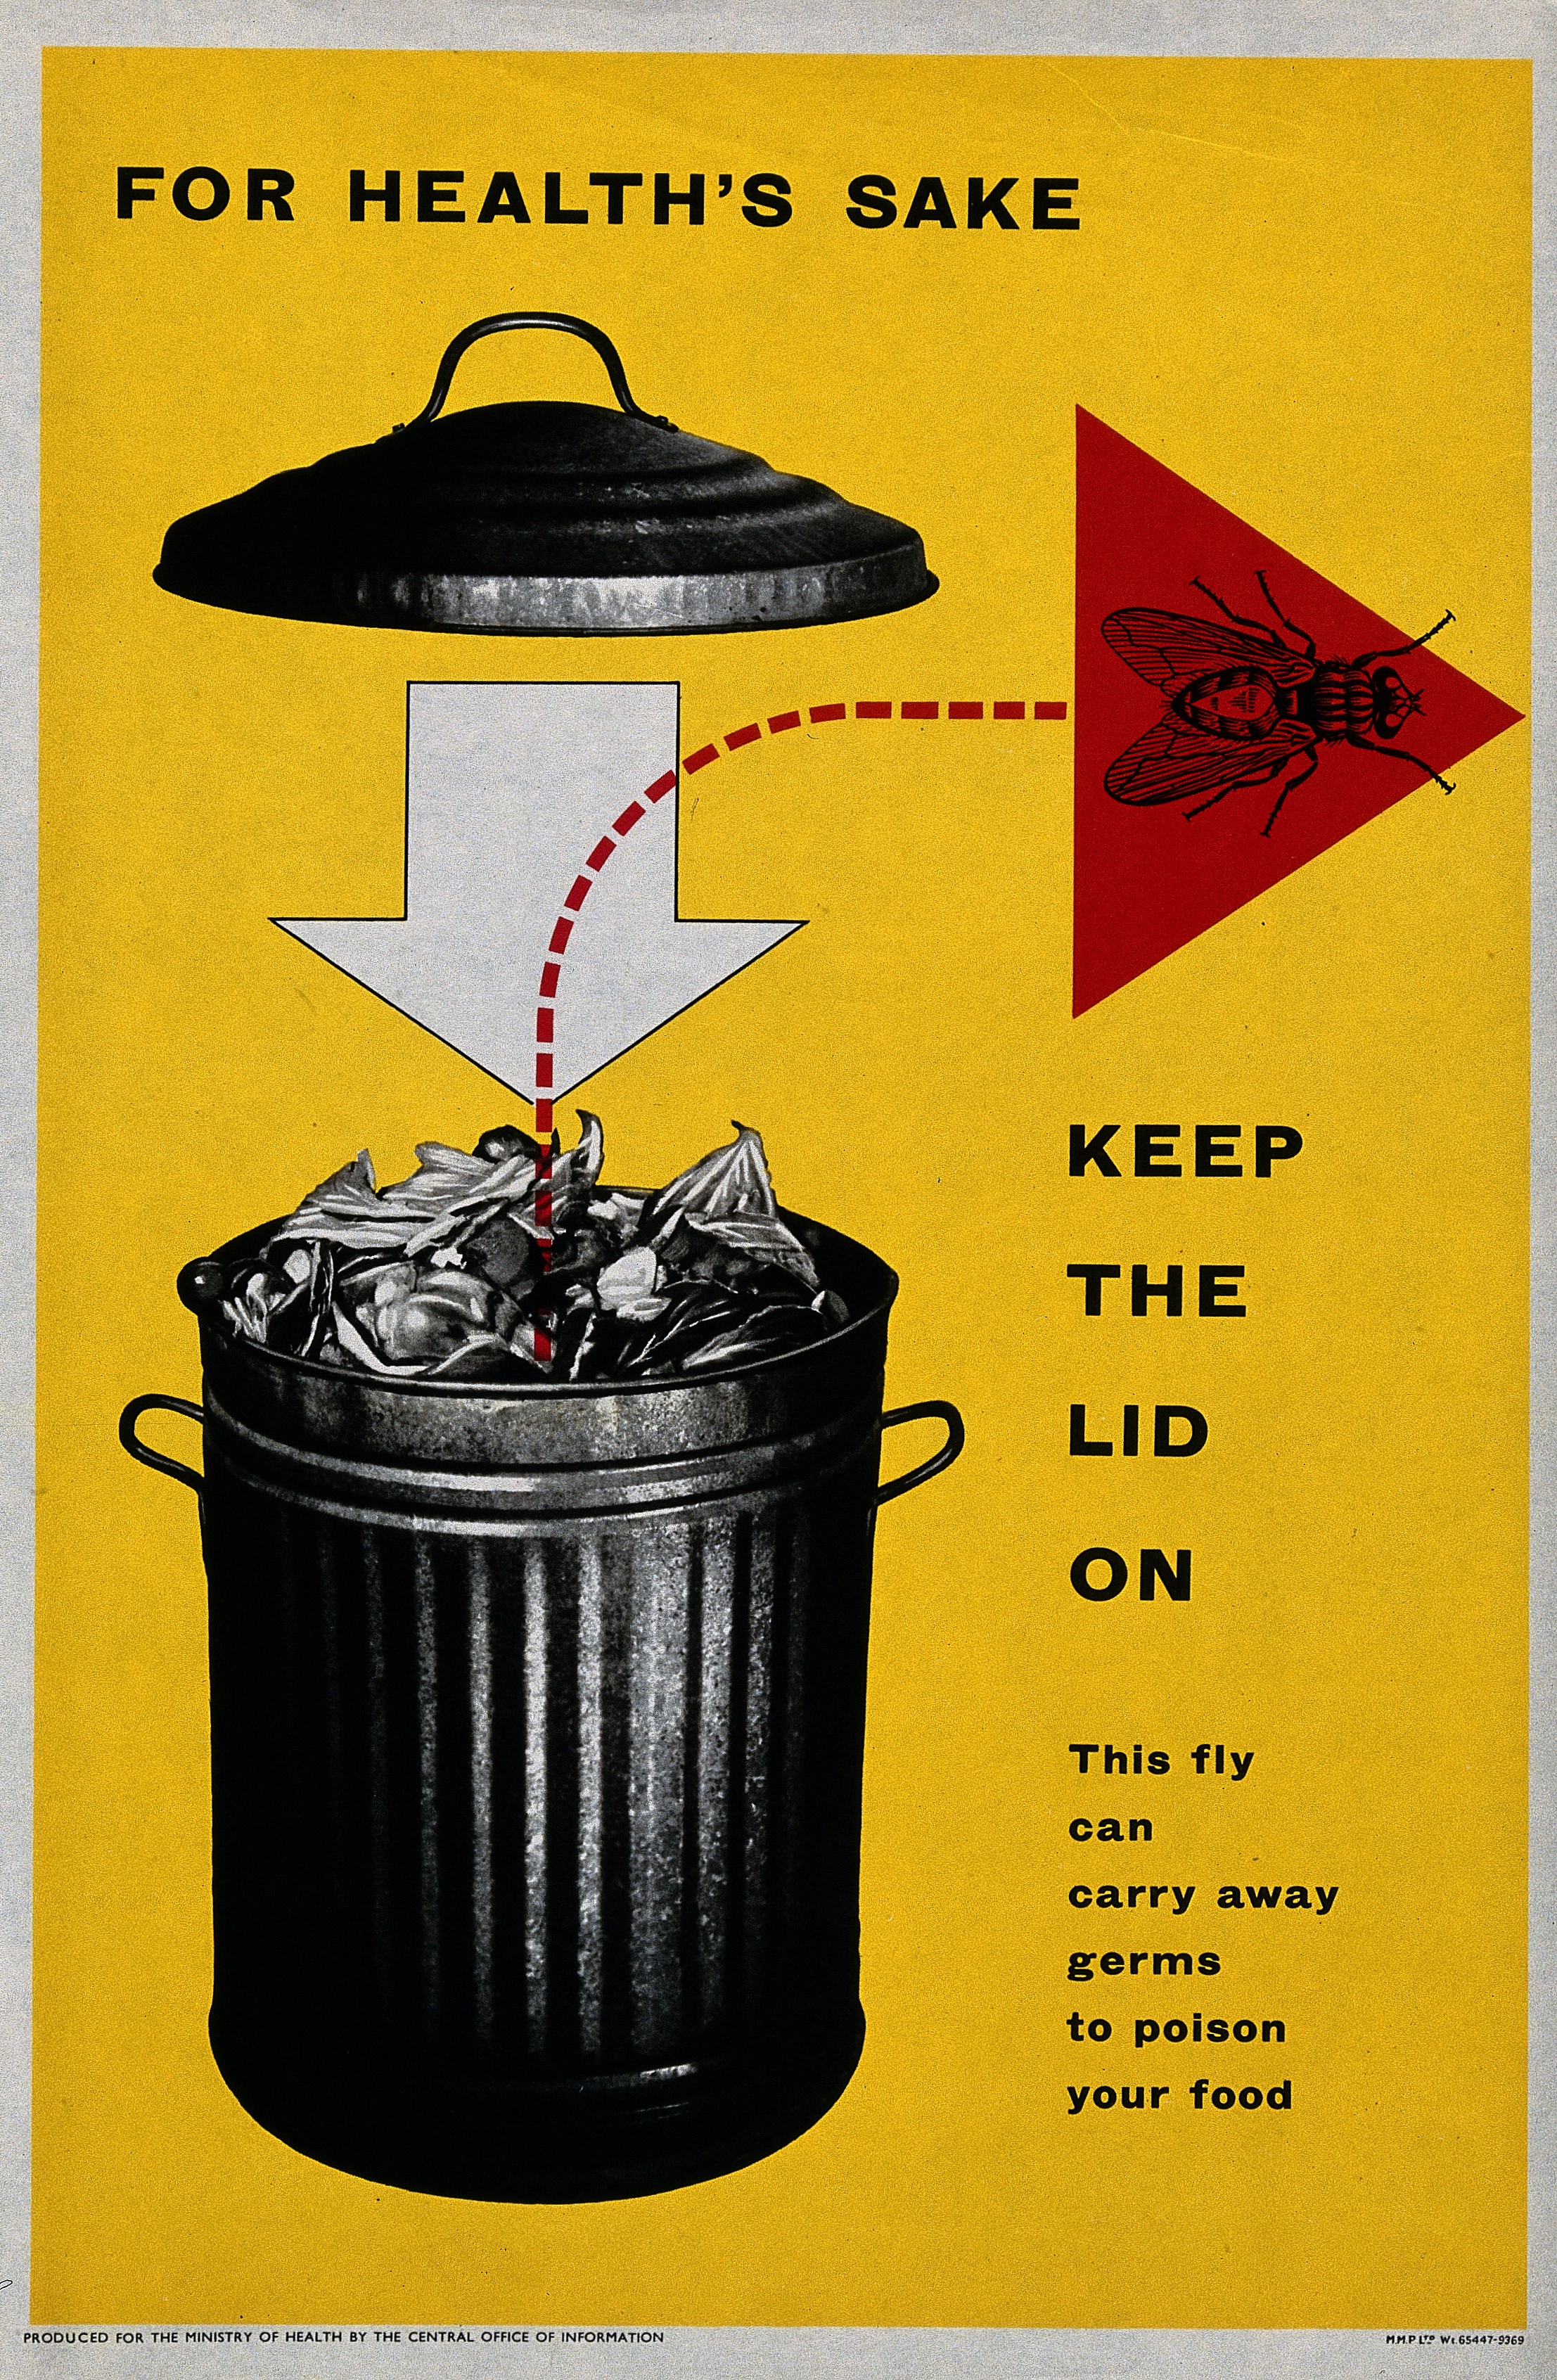 Prevent_flies_by_keeping_a_lid_on_the_bin_Wellcome_V0047902.jpg